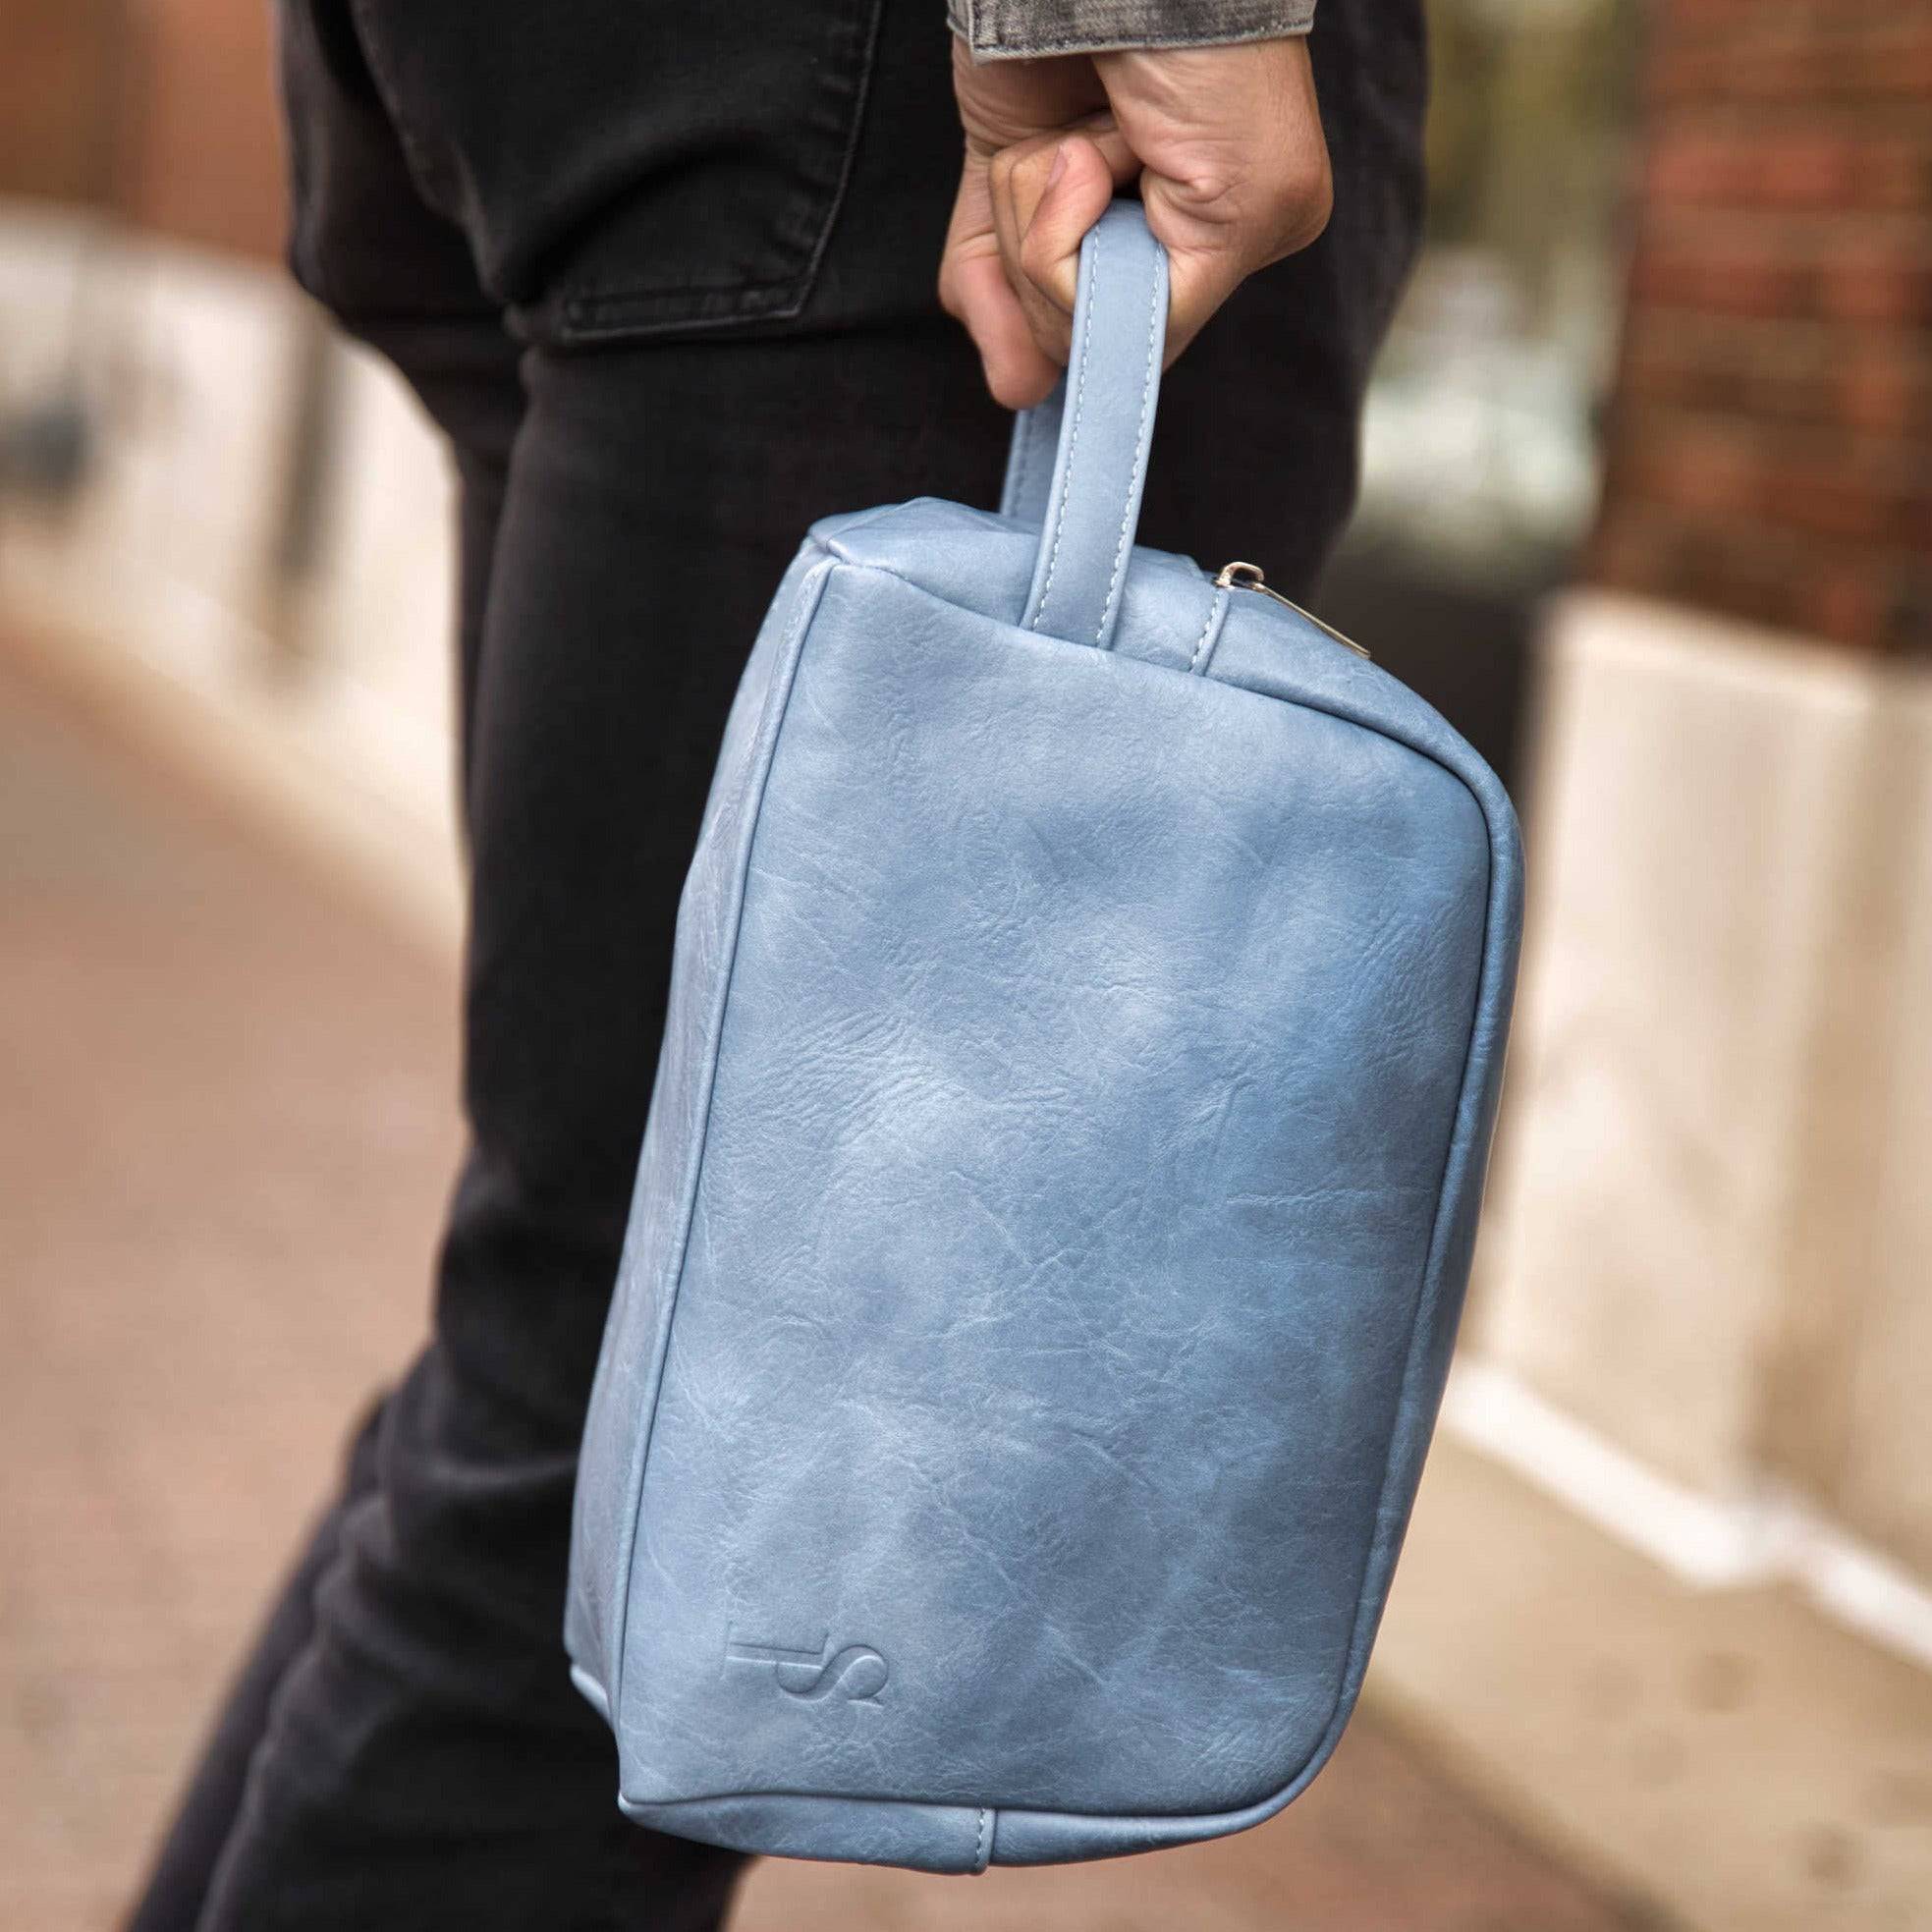 Baby Blue Leather Toiletry Bag - Sole Premise